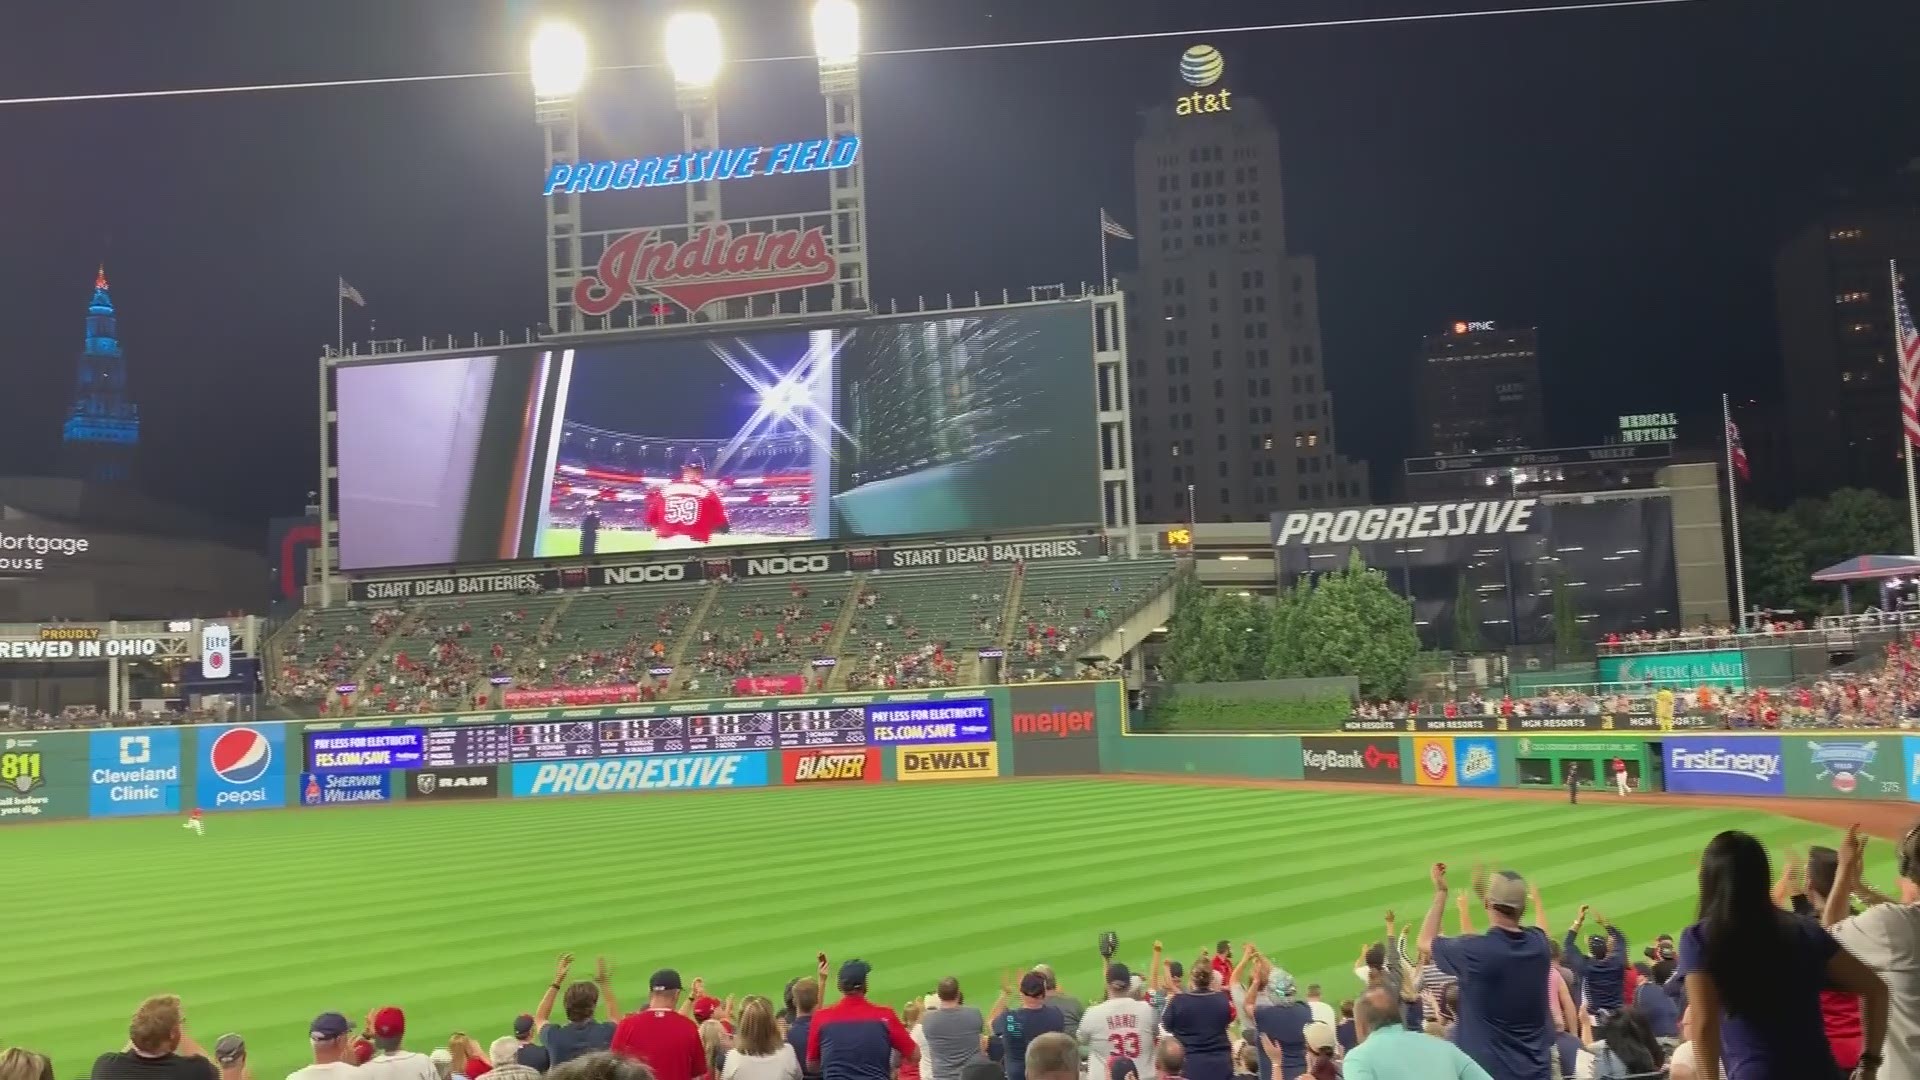 Tribe pitcher Carlos Carrasco received a warm ovation from fans at Progressive Field before returning to the mound in Cleveland for the first time since being diagnosed with leukemia.